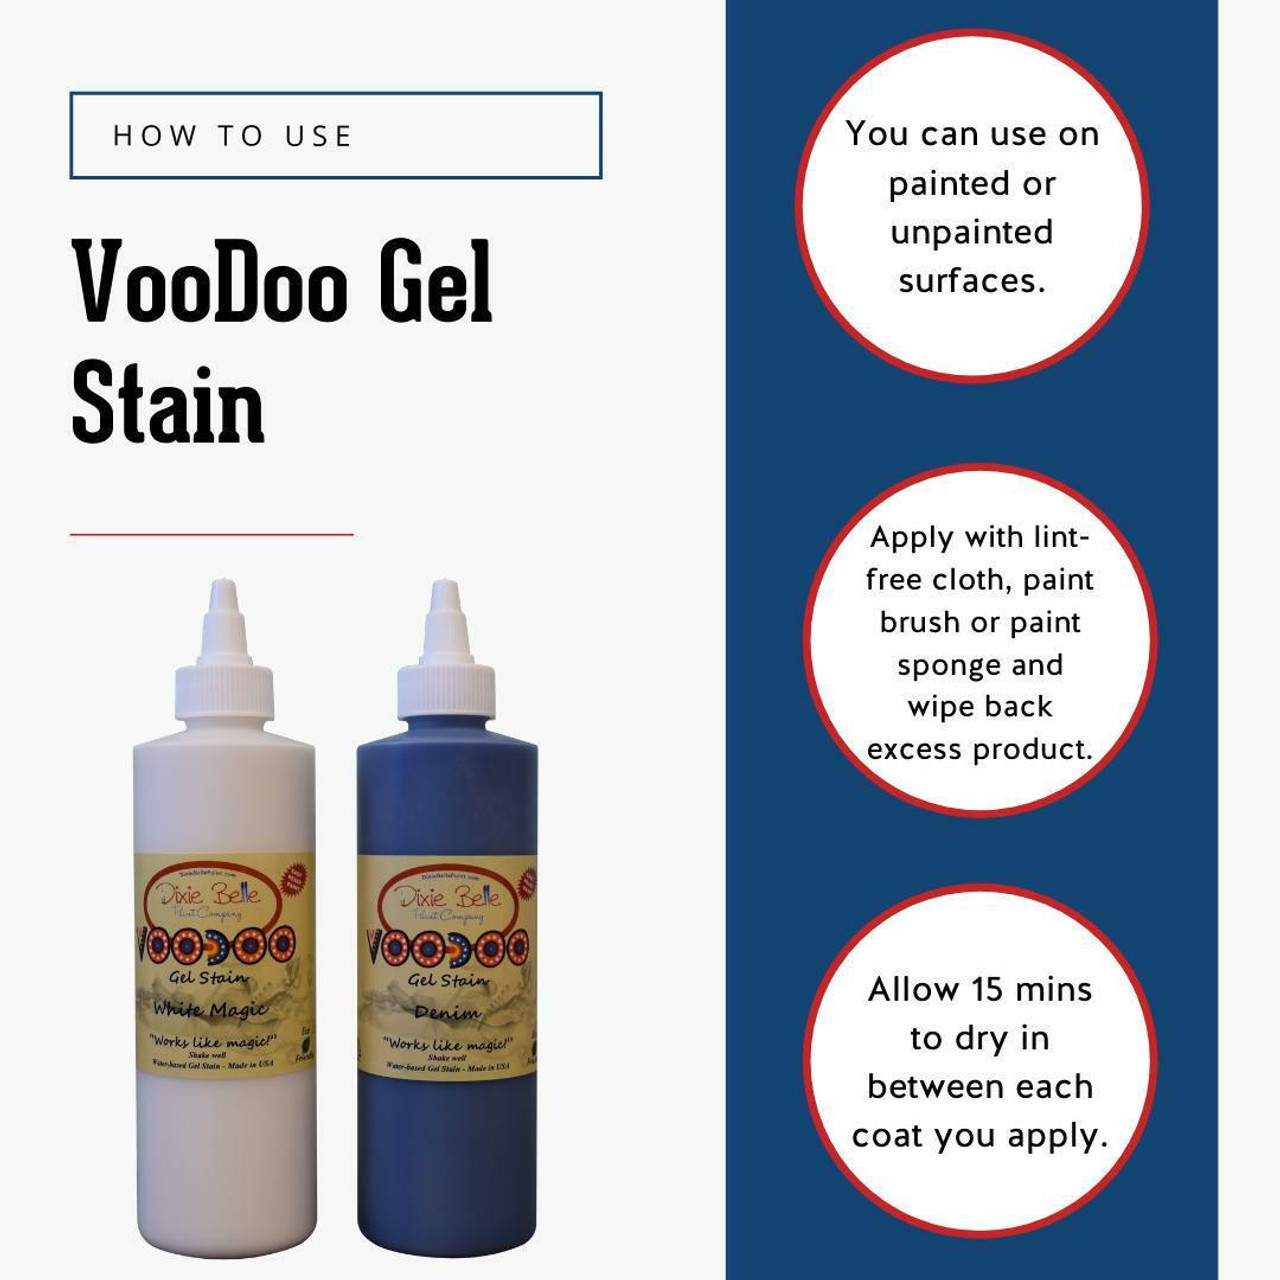 Americana Gel Stain Wood Stain Paint 3-Pack, Wood Tint Colors Walnut, Oak,  Maple, 2-Ounce, With Foam Brushes For Gel Stain Paint